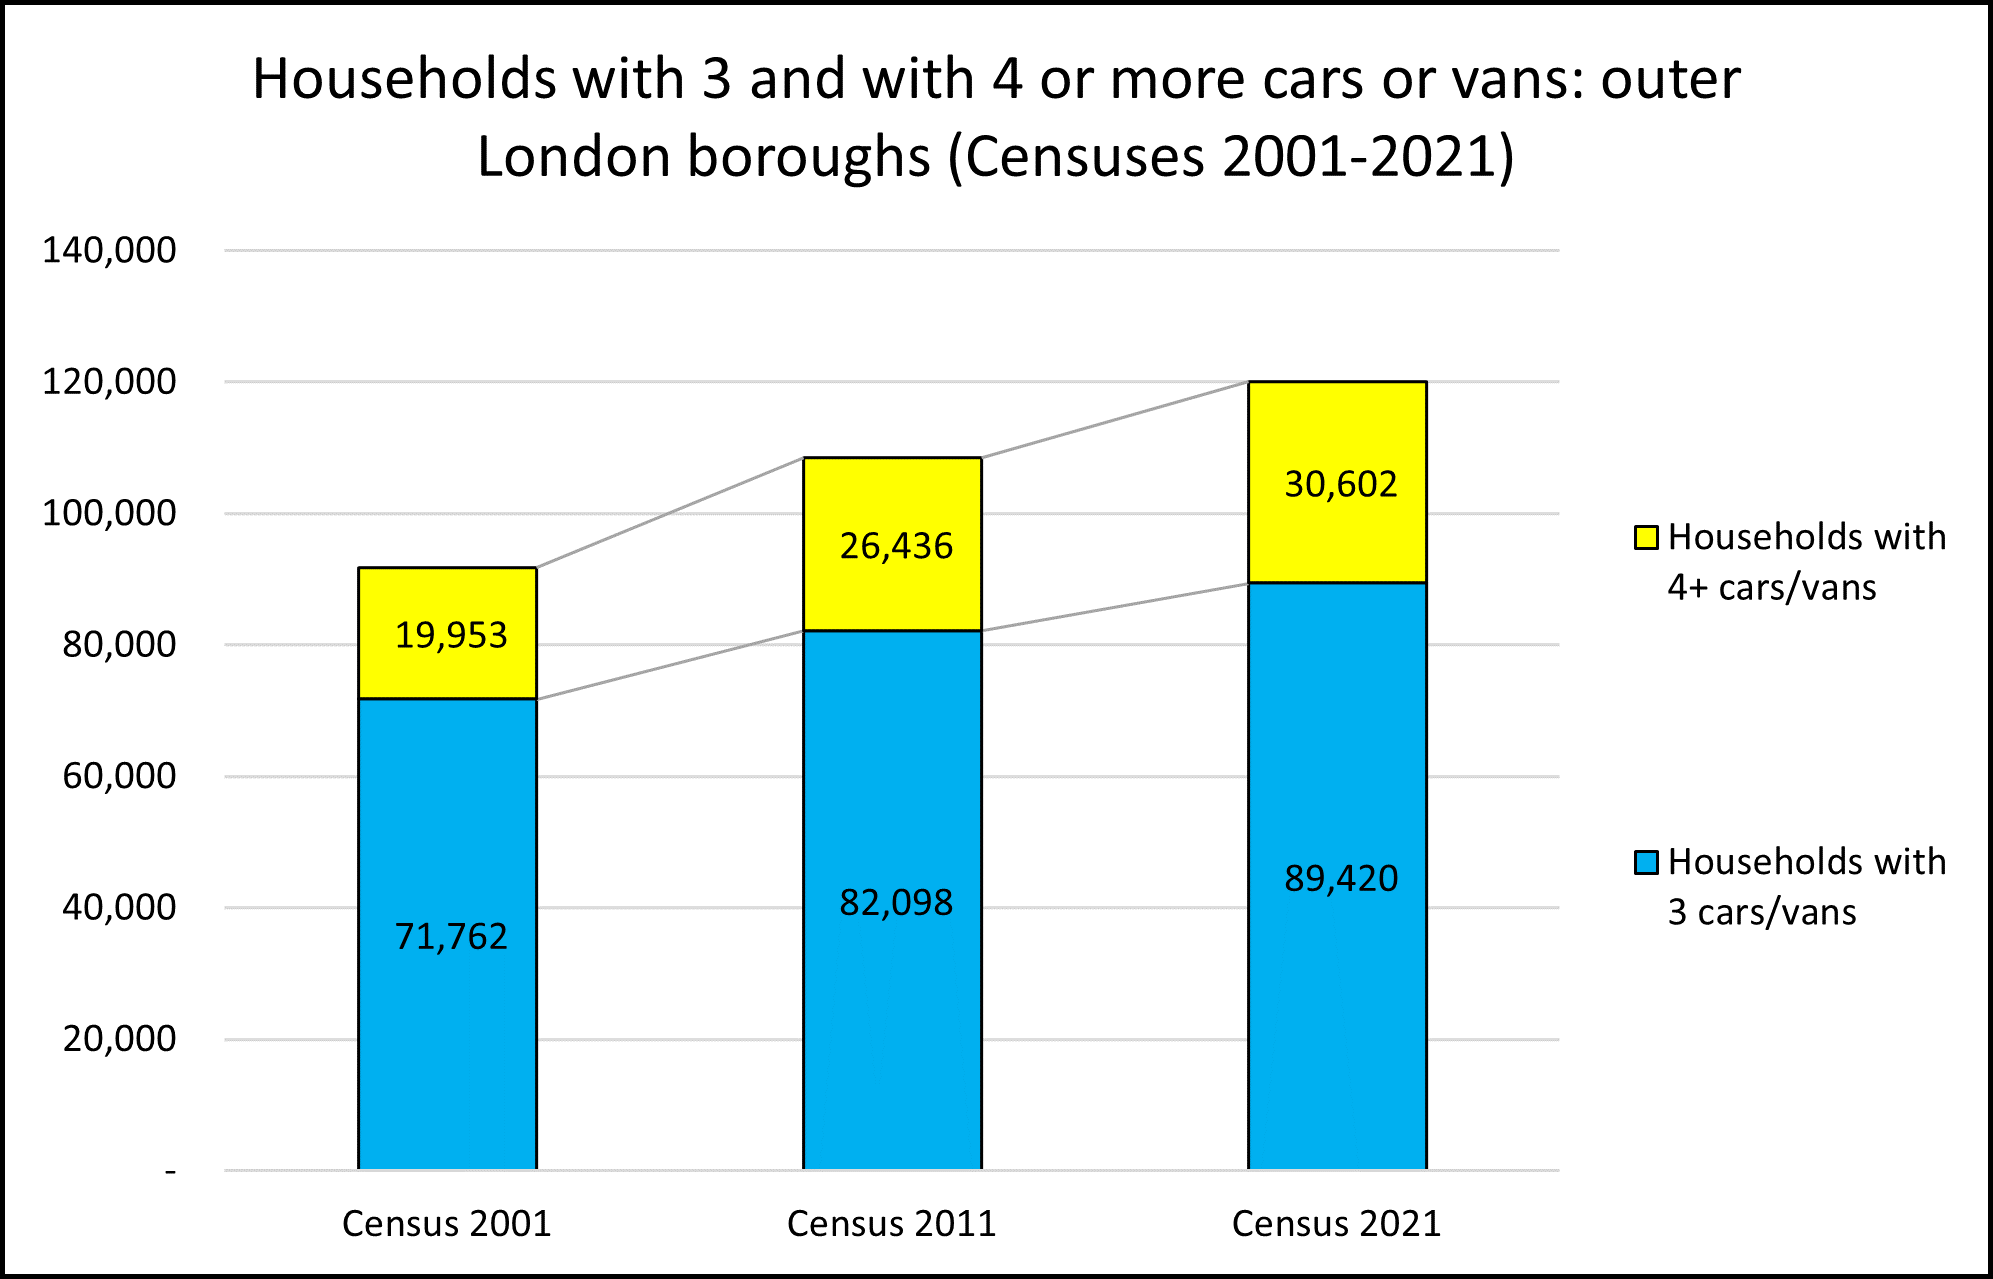 Chart of households with 3 and 4 or more vehicles in outer London 2001-2021